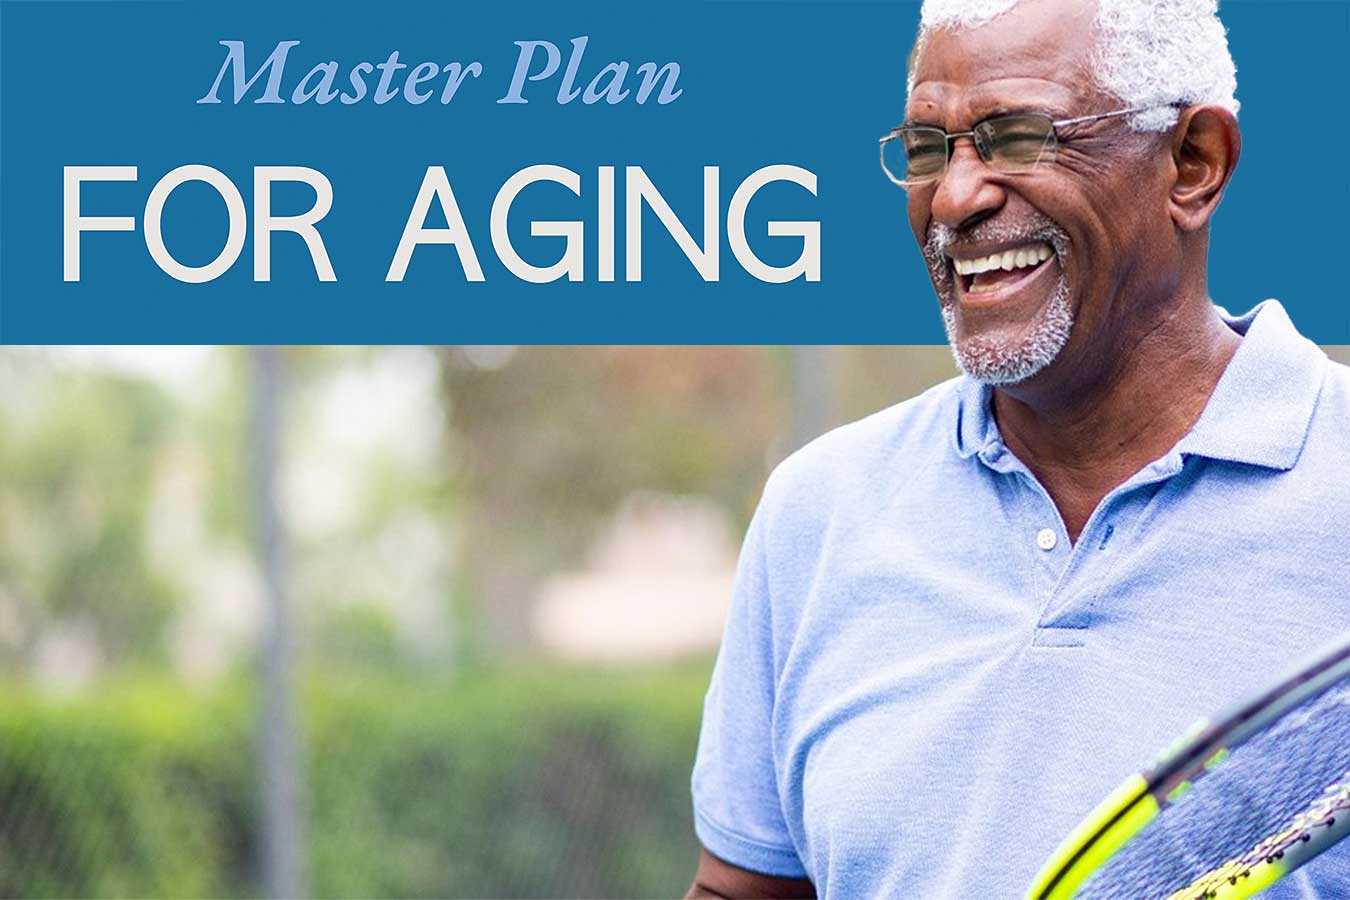 Master Plan for Aging